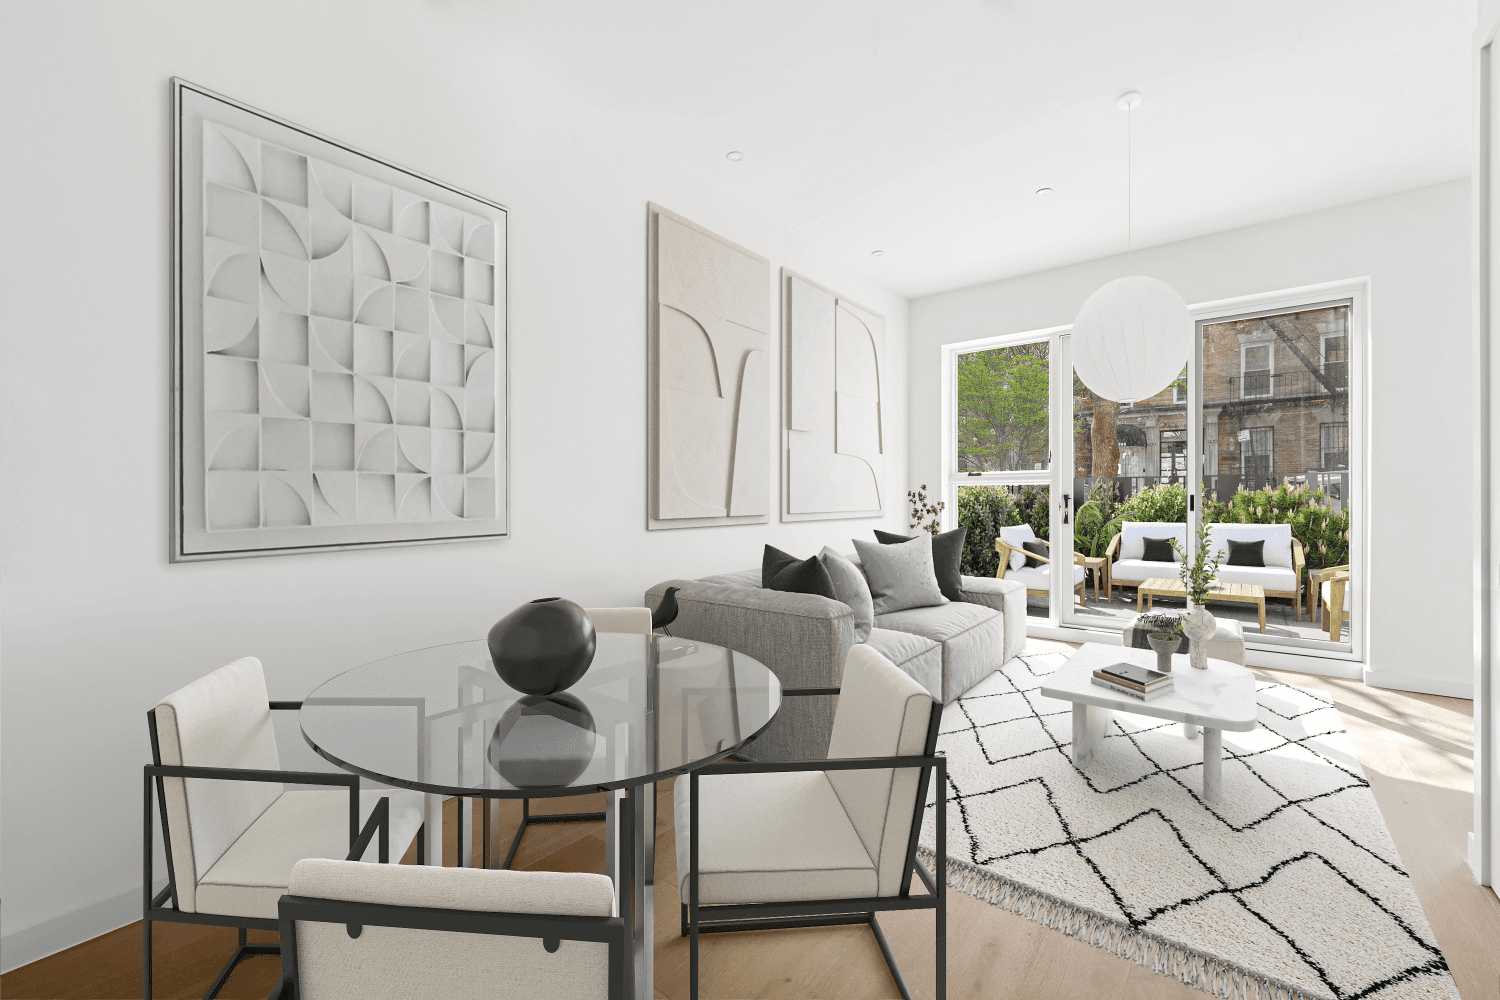 Welcome to 1607 Pacific, a stunning new development of 8 boutique condominiums in the heart of Crown Heights, Brooklyn.